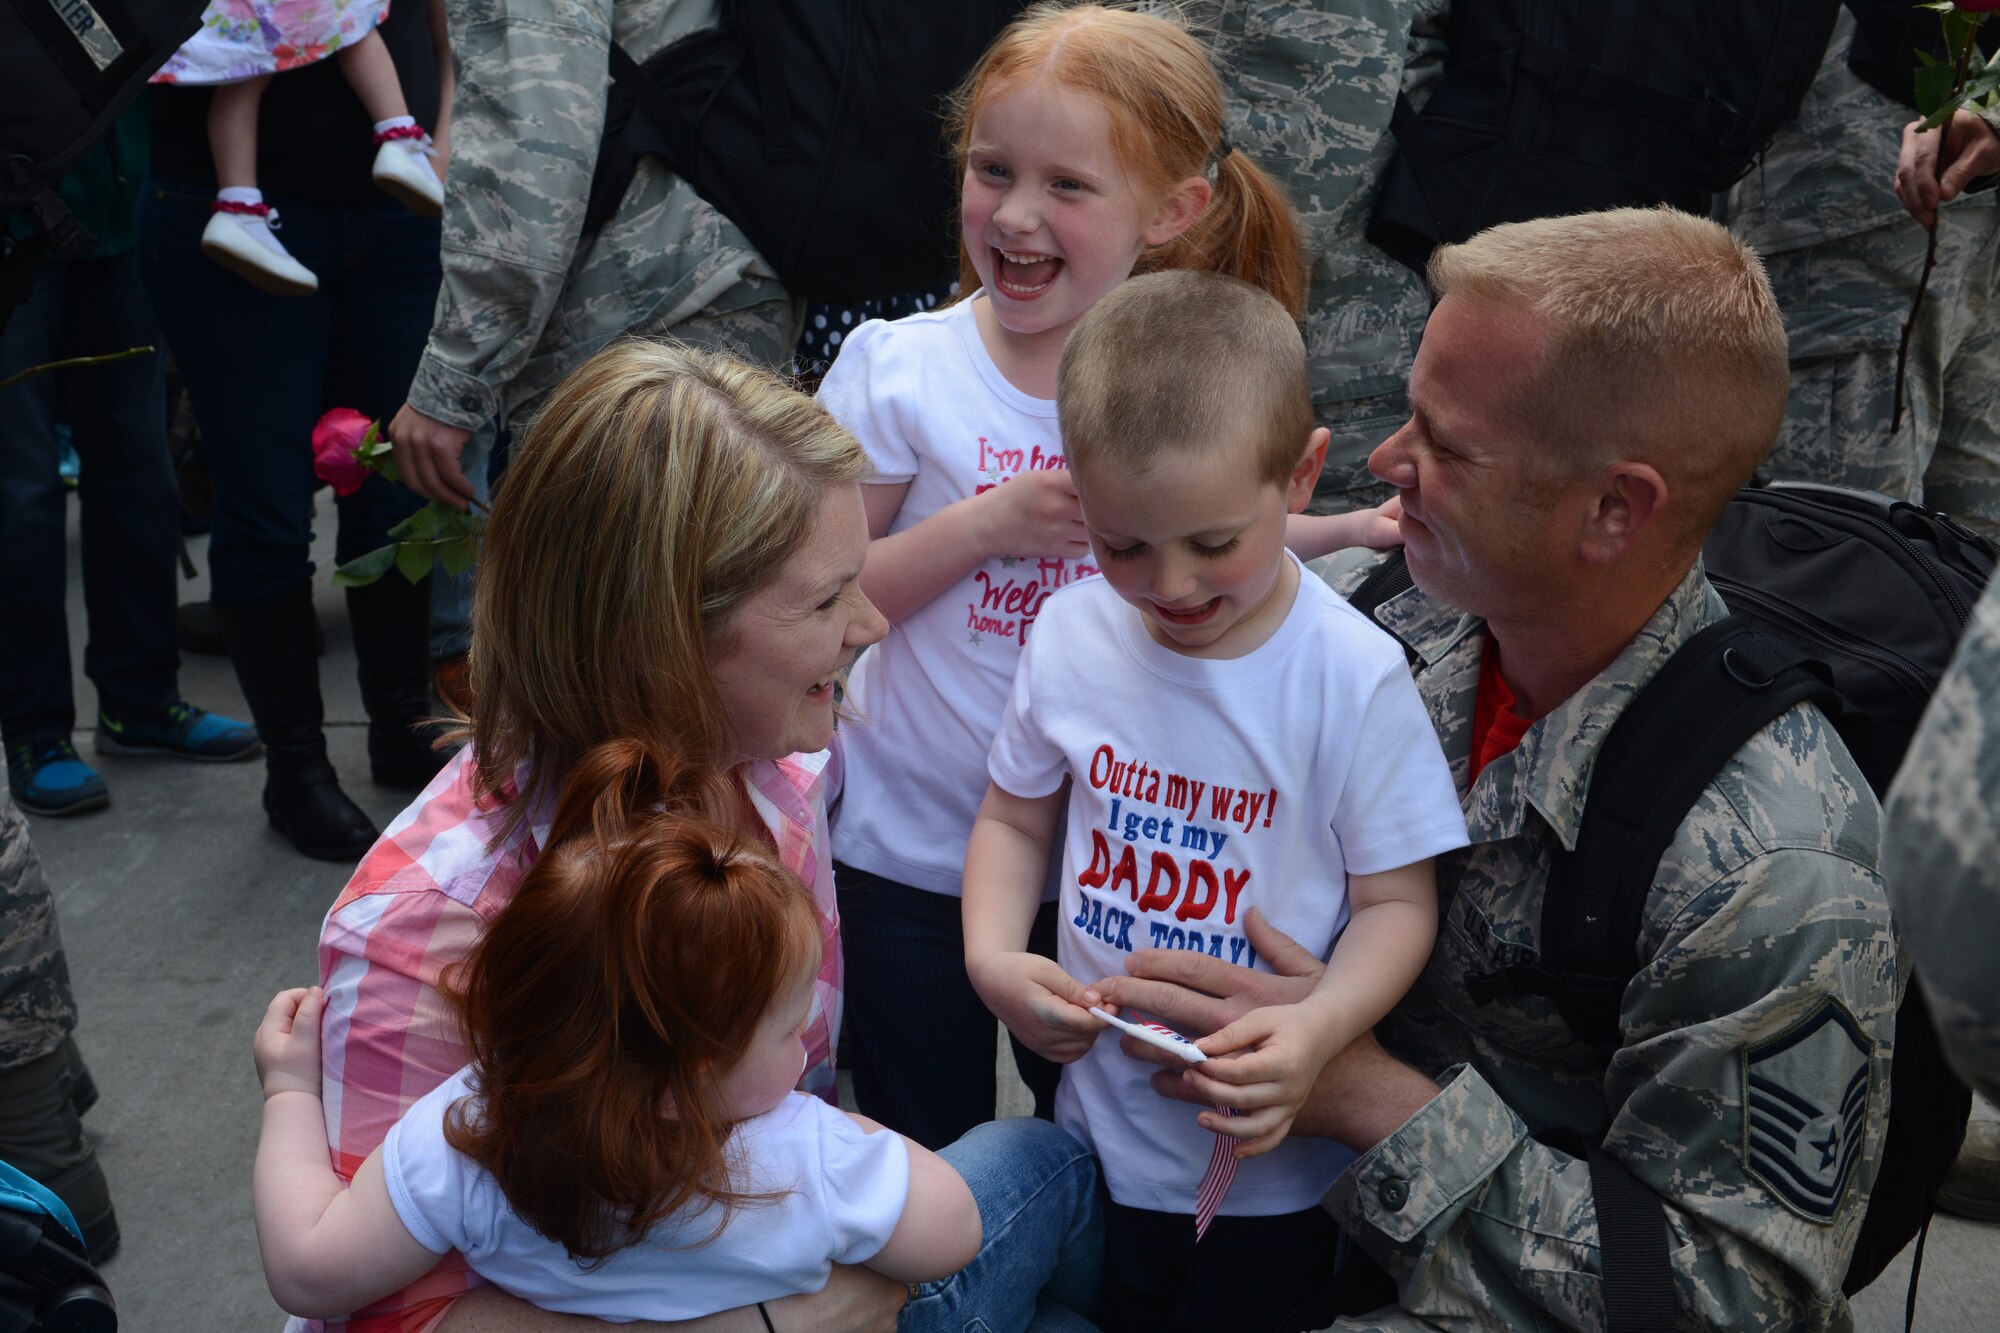 A family greets its 115th Fighter Wing Airman upon arrival in Hangar 406 in Madison, Wis., April 19, 2015. More than 250 Airmen were welcomed home by family, friends and the community. The Airmen were deployed for four months to Kadena Air Base in Okinawa, Japan, in support of the Pacific Command Theater Security Package. (U.S. Air National Guard photo by Senior Airman Andrea F. Rhode)